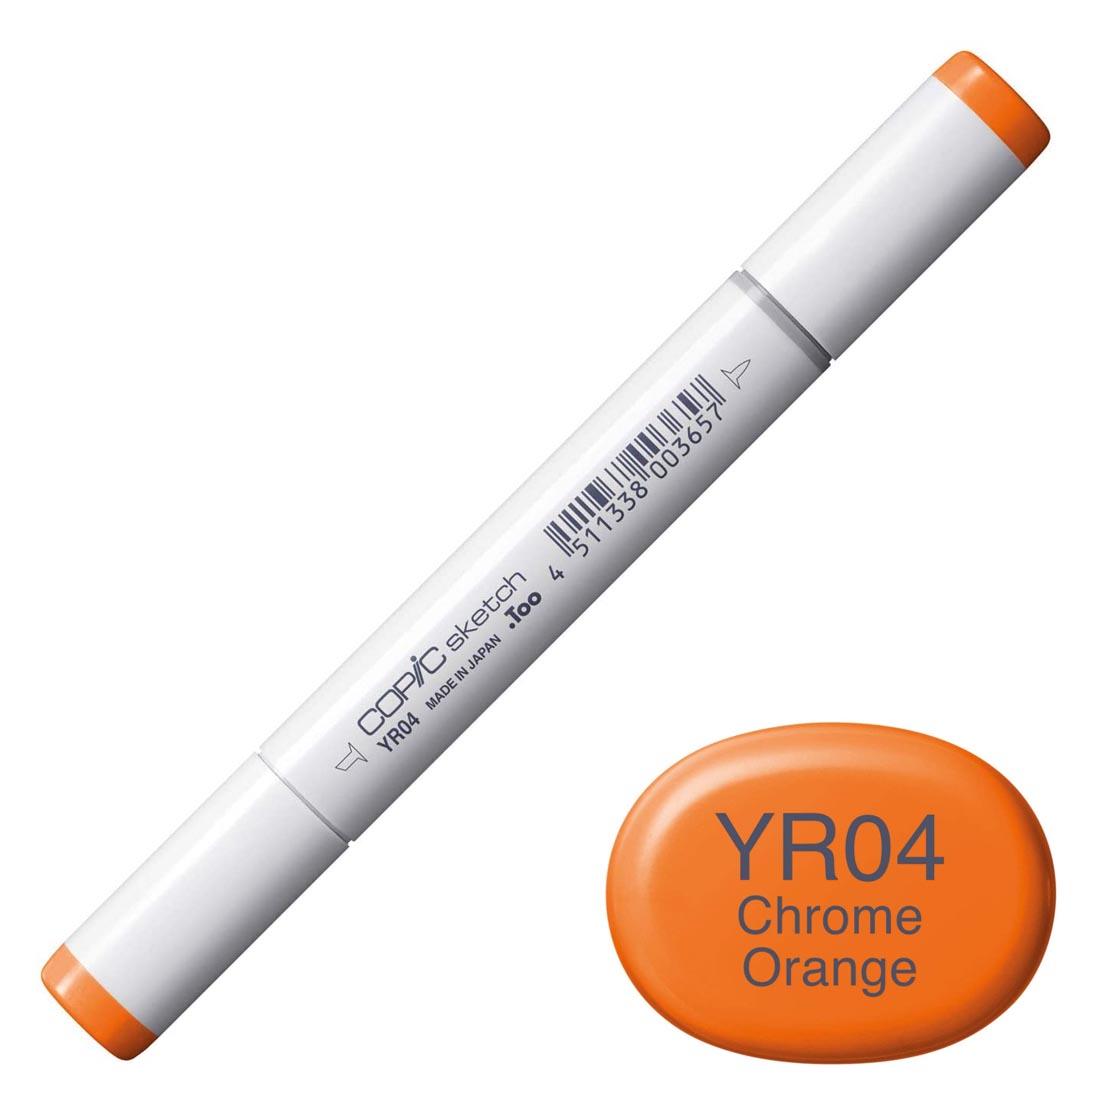 COPIC Sketch Marker with a color swatch and text of YR04 Chrome Orange